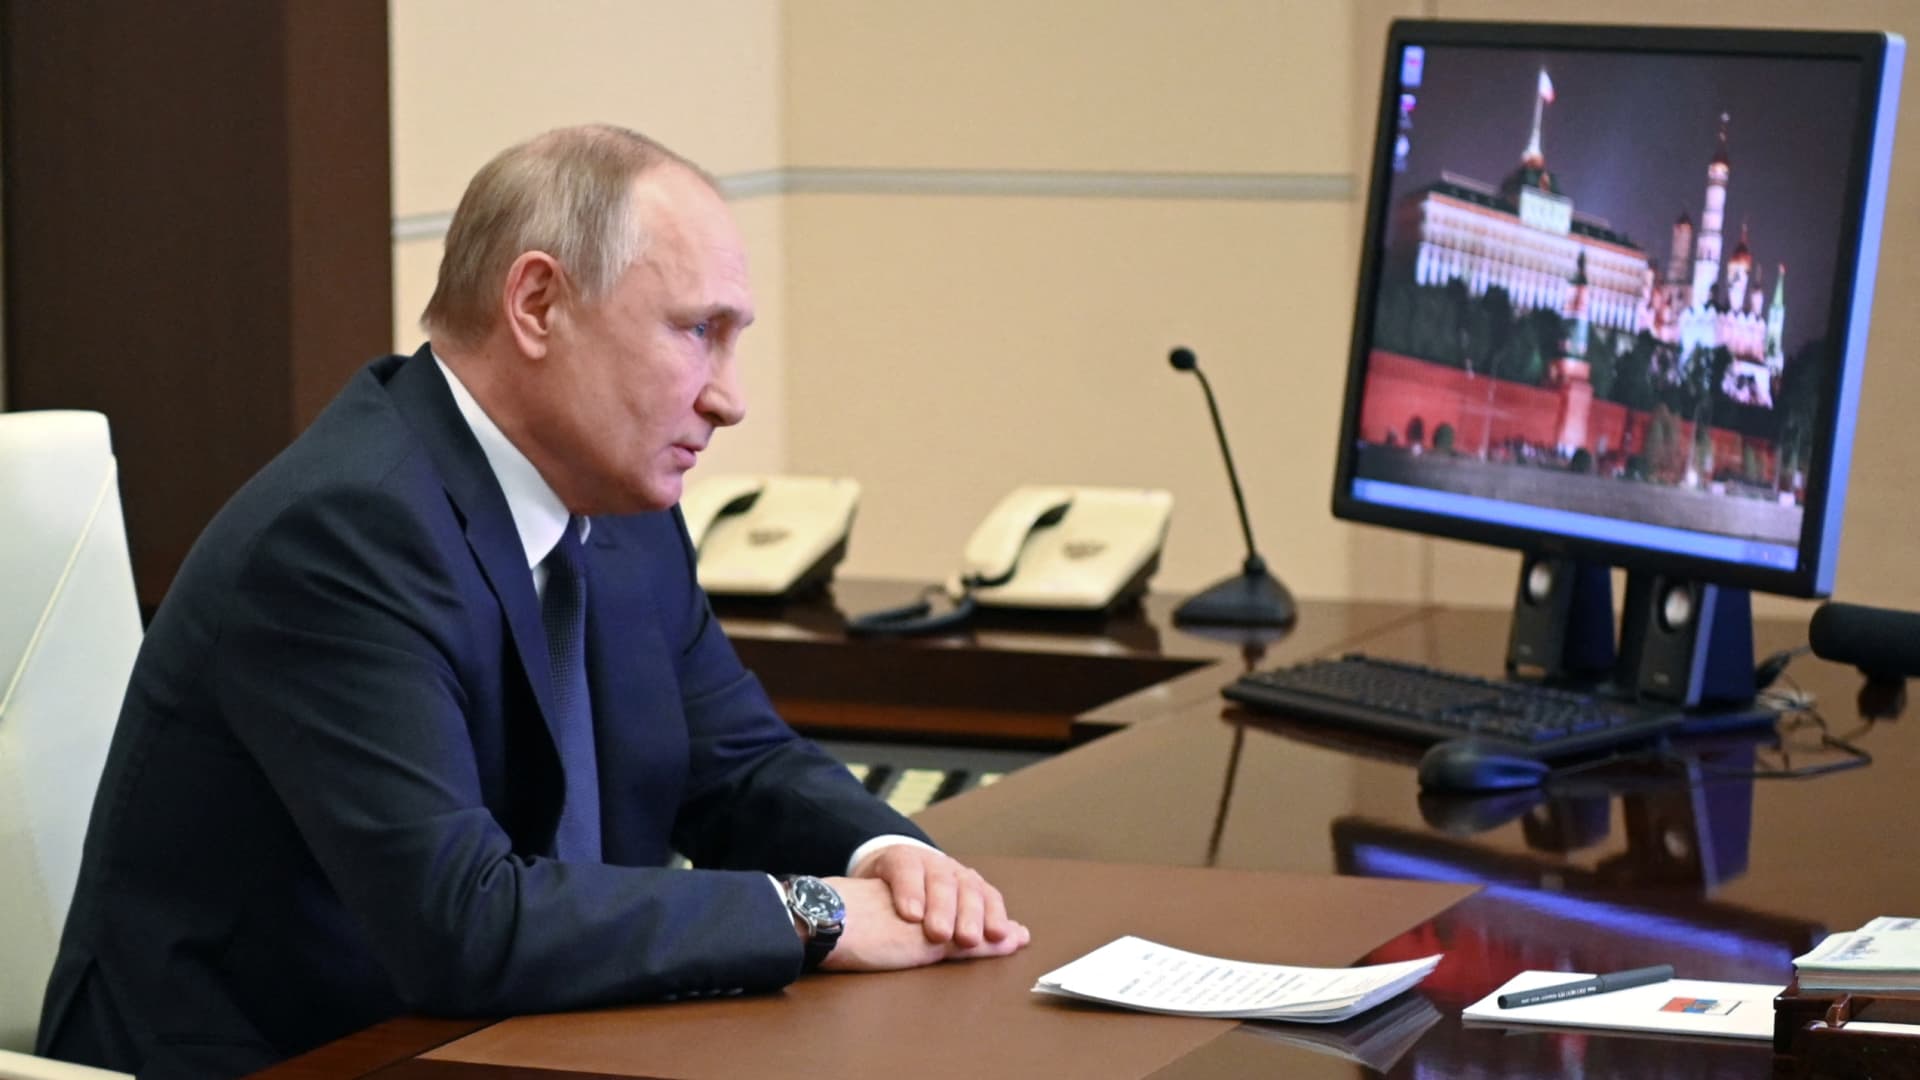 Russian President Vladimir Putin chairs a meeting with members of the Security Council via a video link at the Novo-Ogaryovo state residence outside Moscow, Russia March 3, 2022.